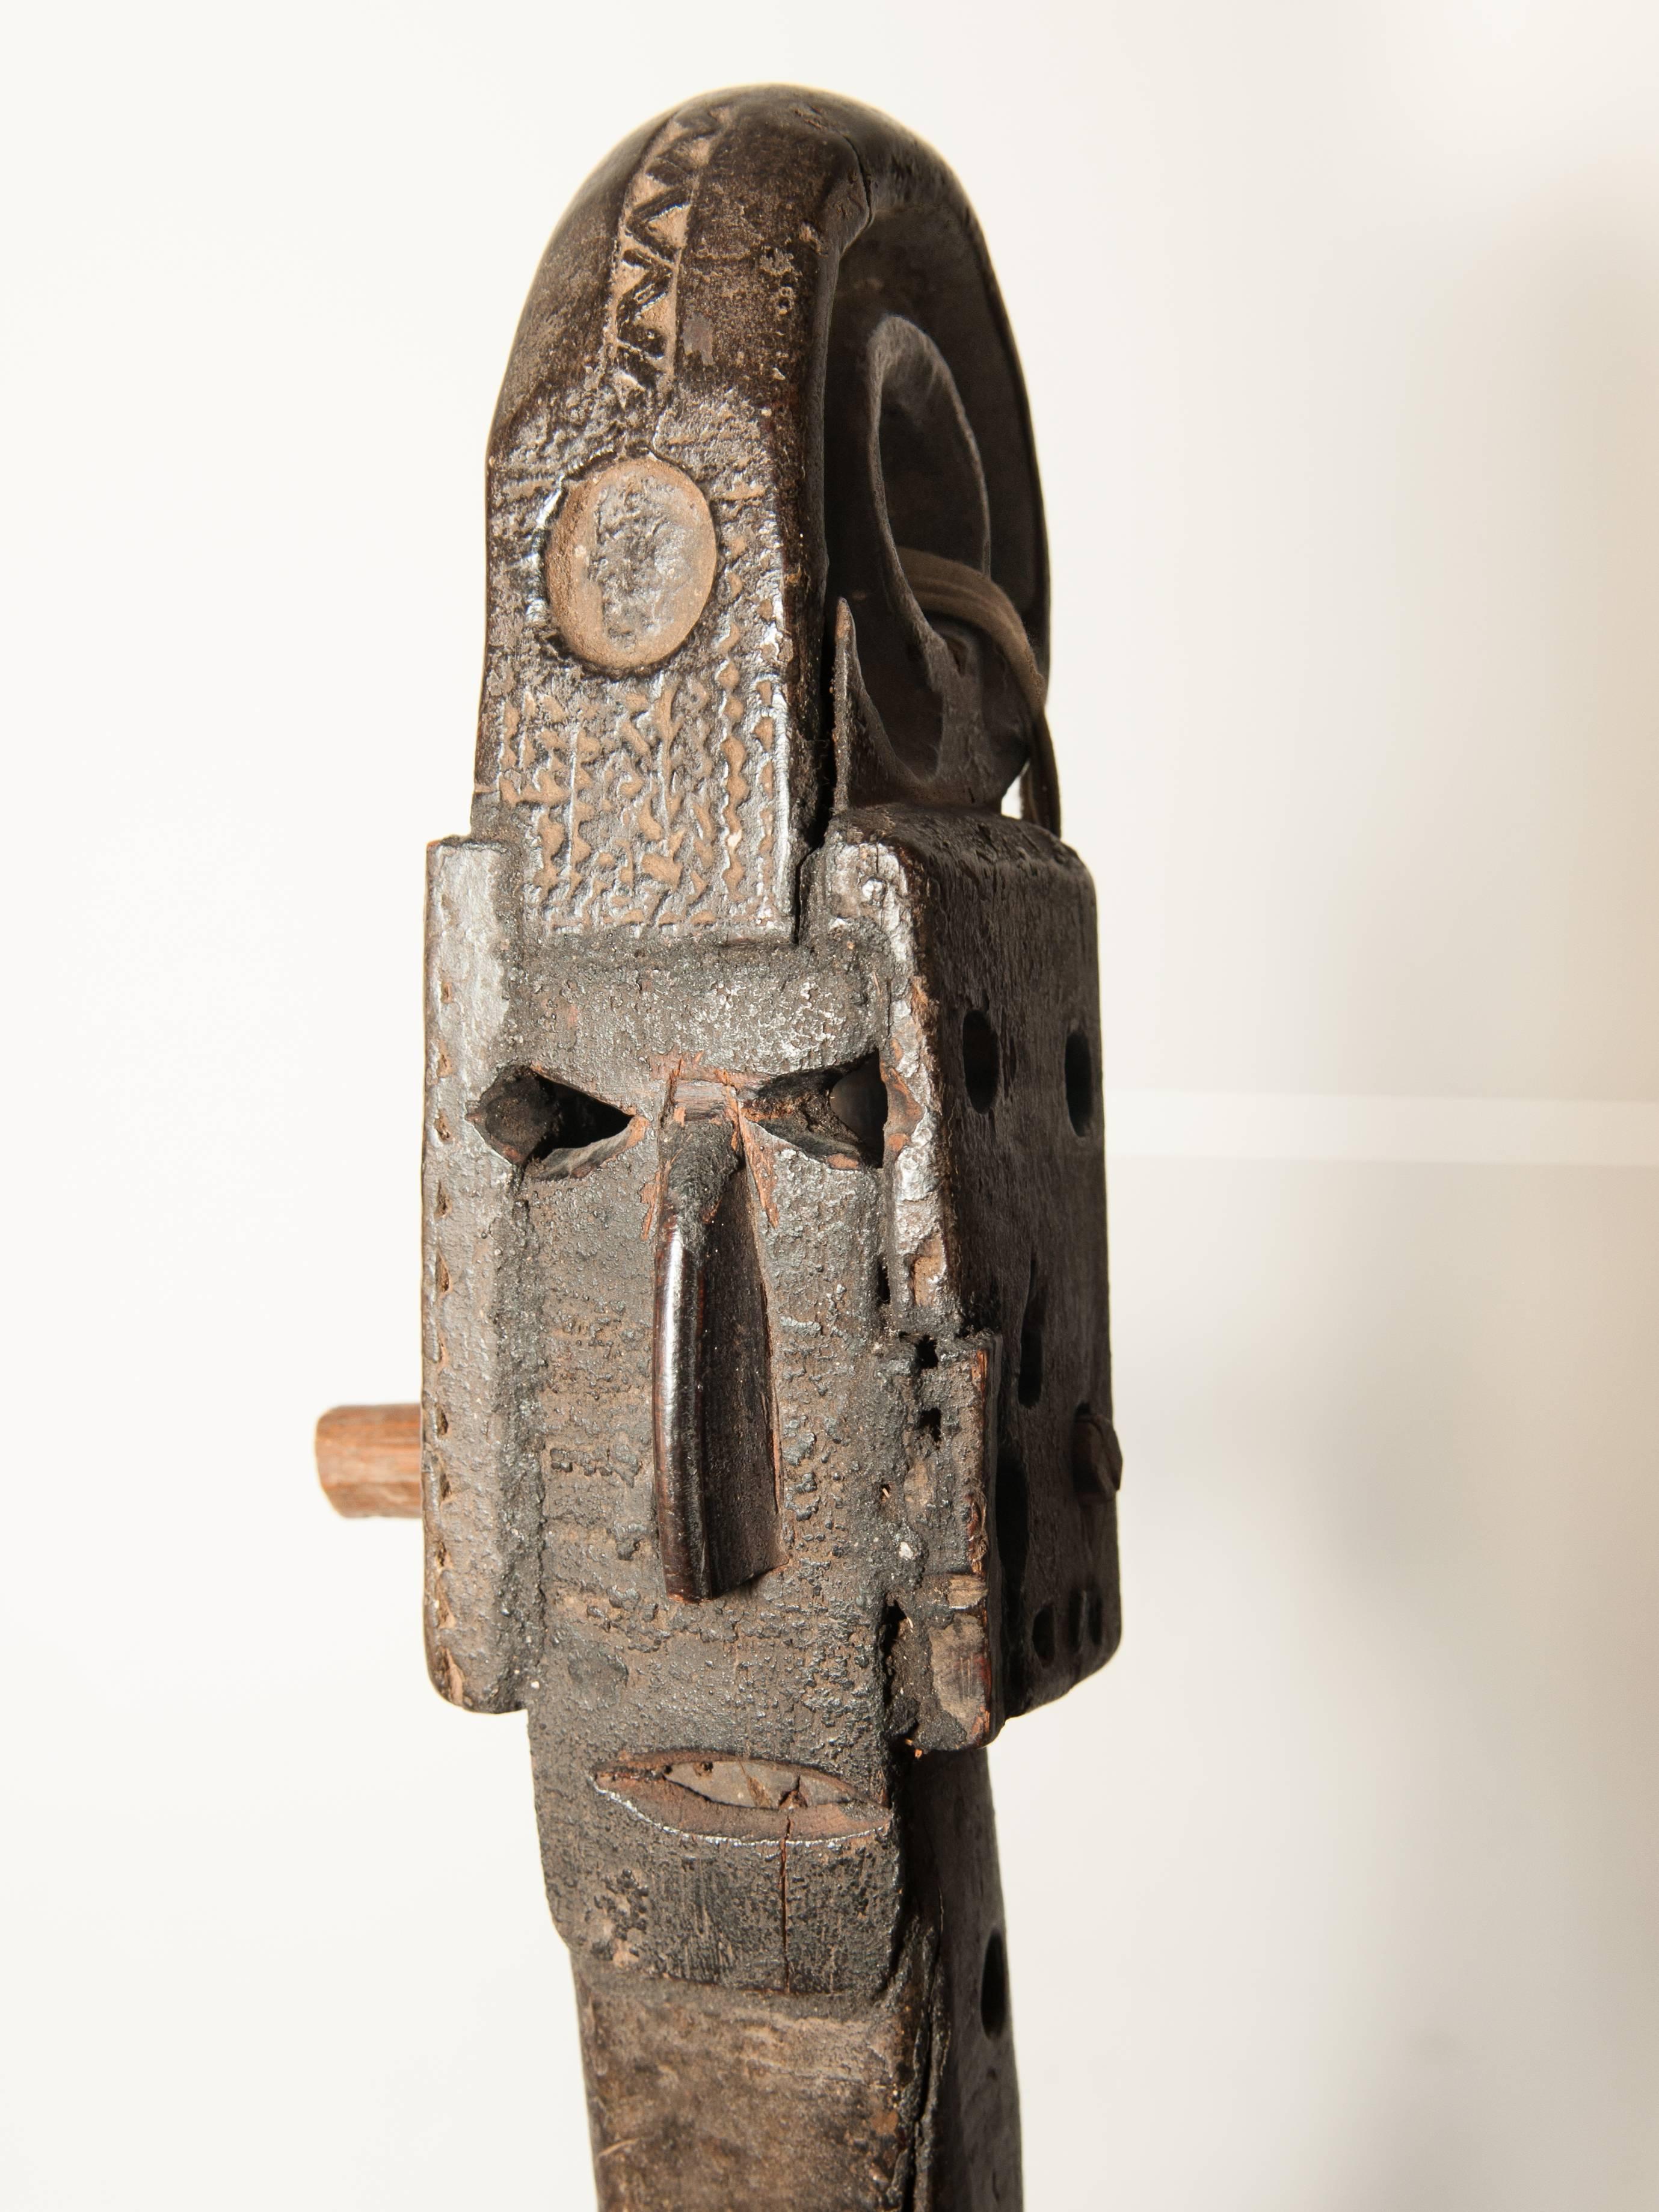 Tribal hand-carved Lute or Sarangi. Likely from the Gaine caste of wandering musicians from the Nepal Himalaya region, early 20th century.
This form of the lute with this particular rendering of the human face, and with the pinched waist, is